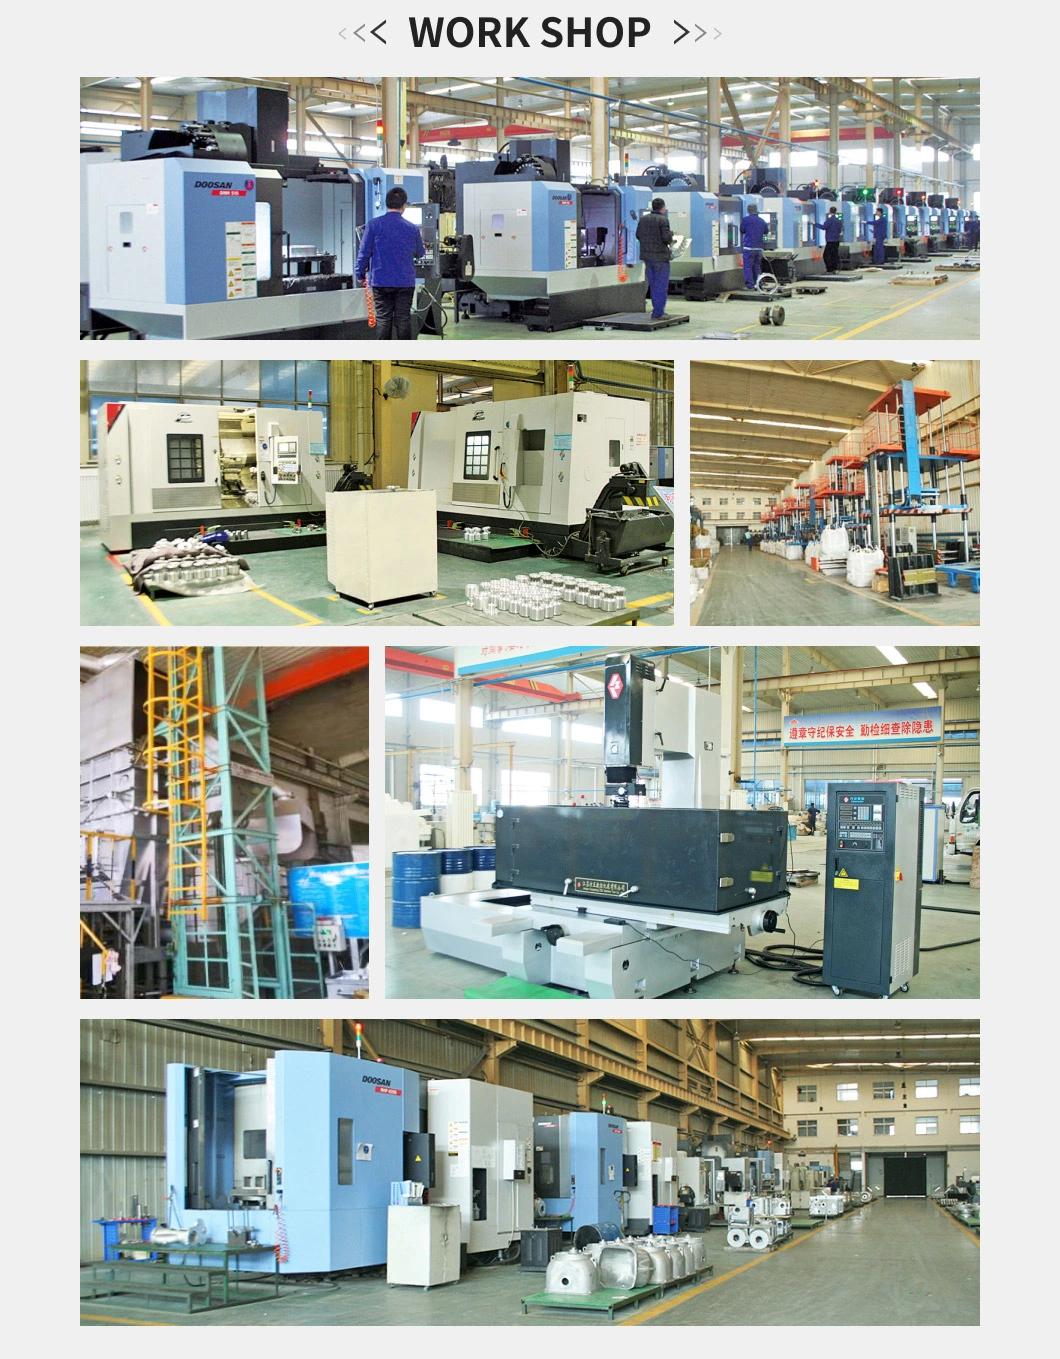 Takai OEM and ODM Customized Aluminum Casting for Motor Controller Engine Manufacturer